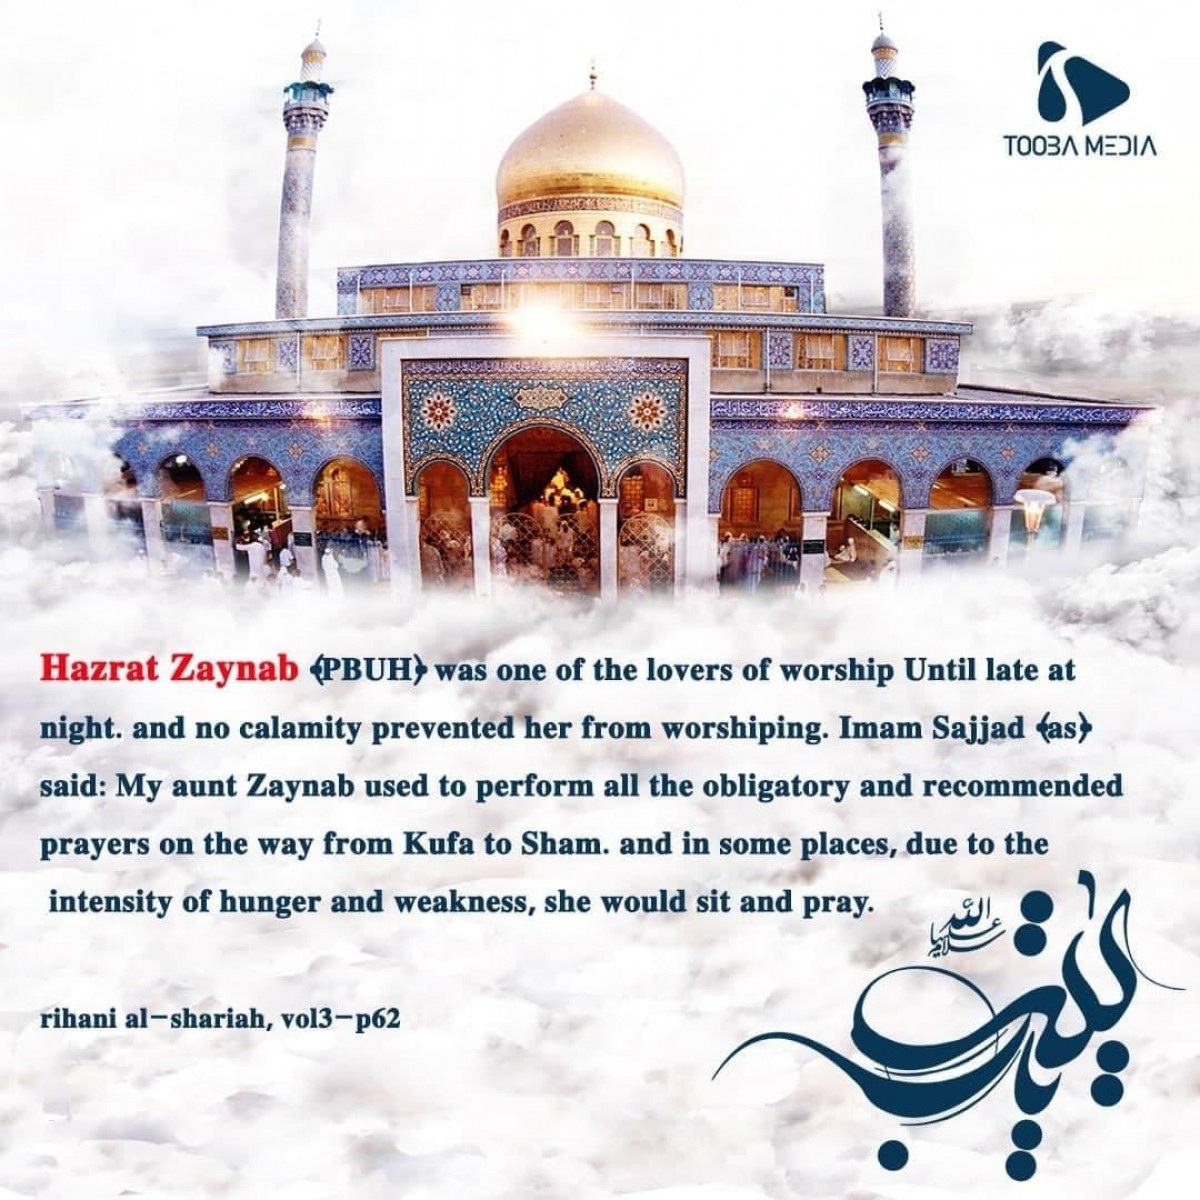 Hazrat Zaynab (PBUH) was one of the lovers of worship Until late at night